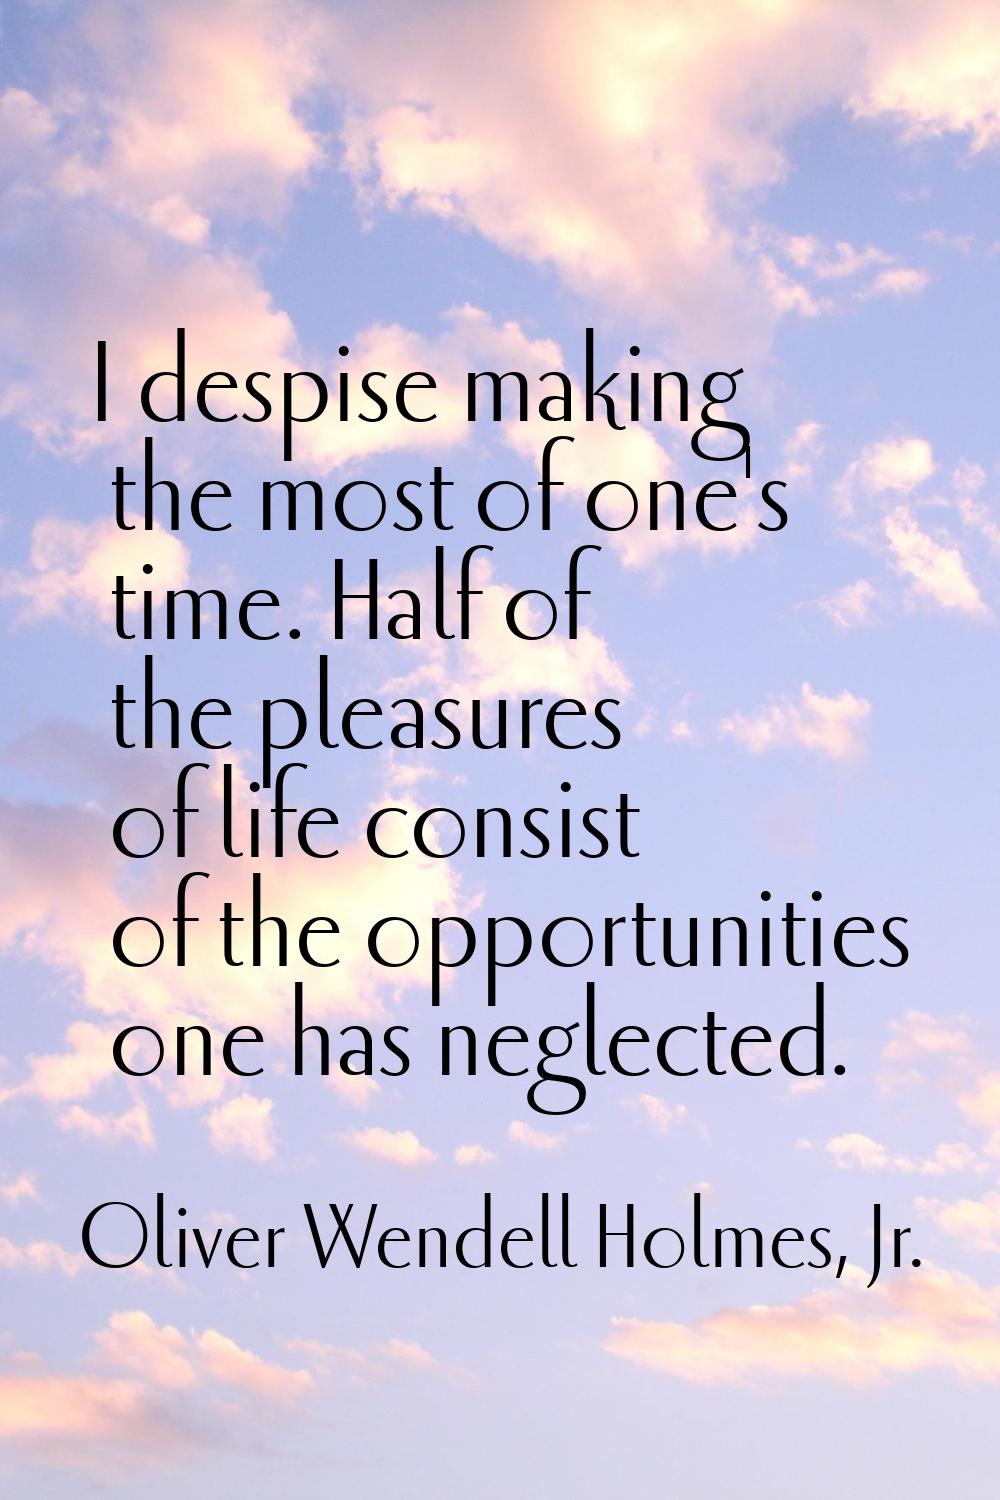 I despise making the most of one's time. Half of the pleasures of life consist of the opportunities